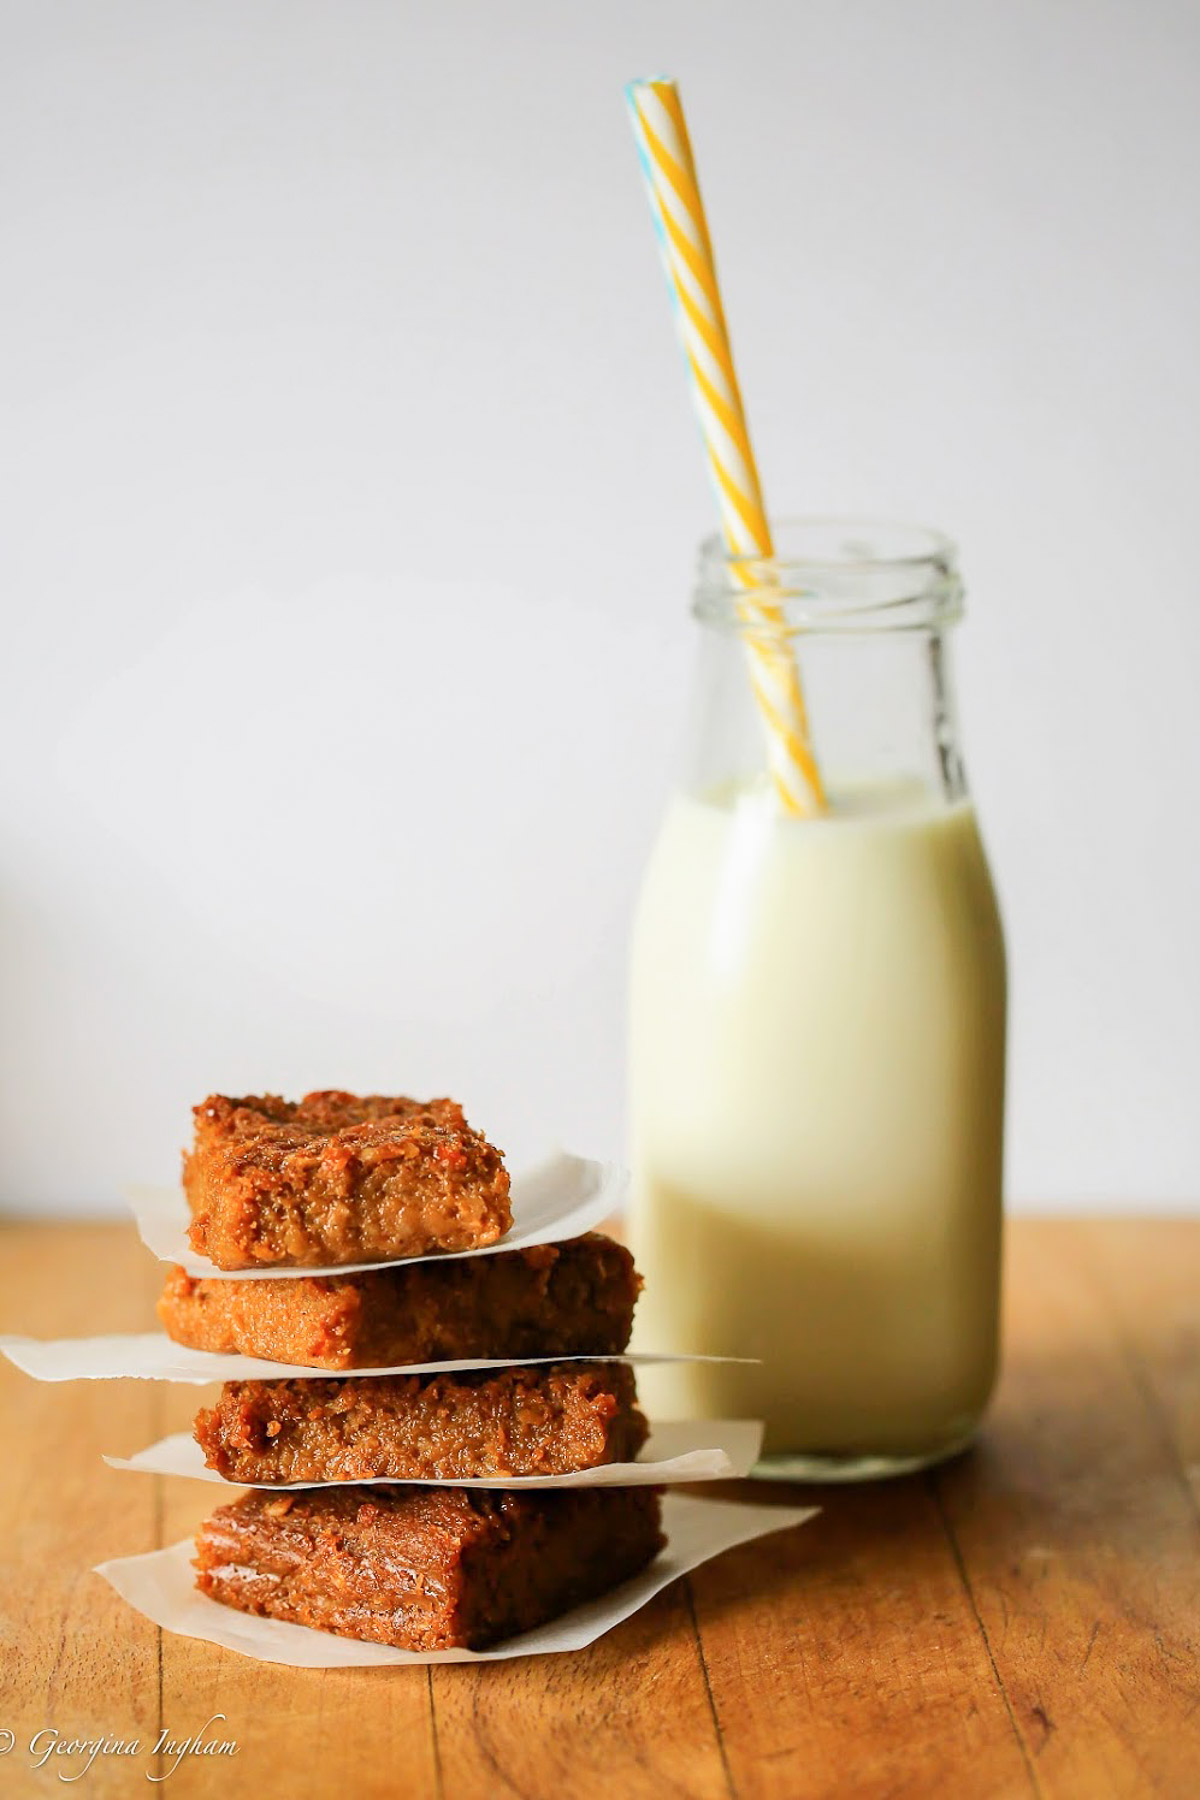 A stack of sticky gingerbread from Culinary Travels Blog with a bottle of milk.